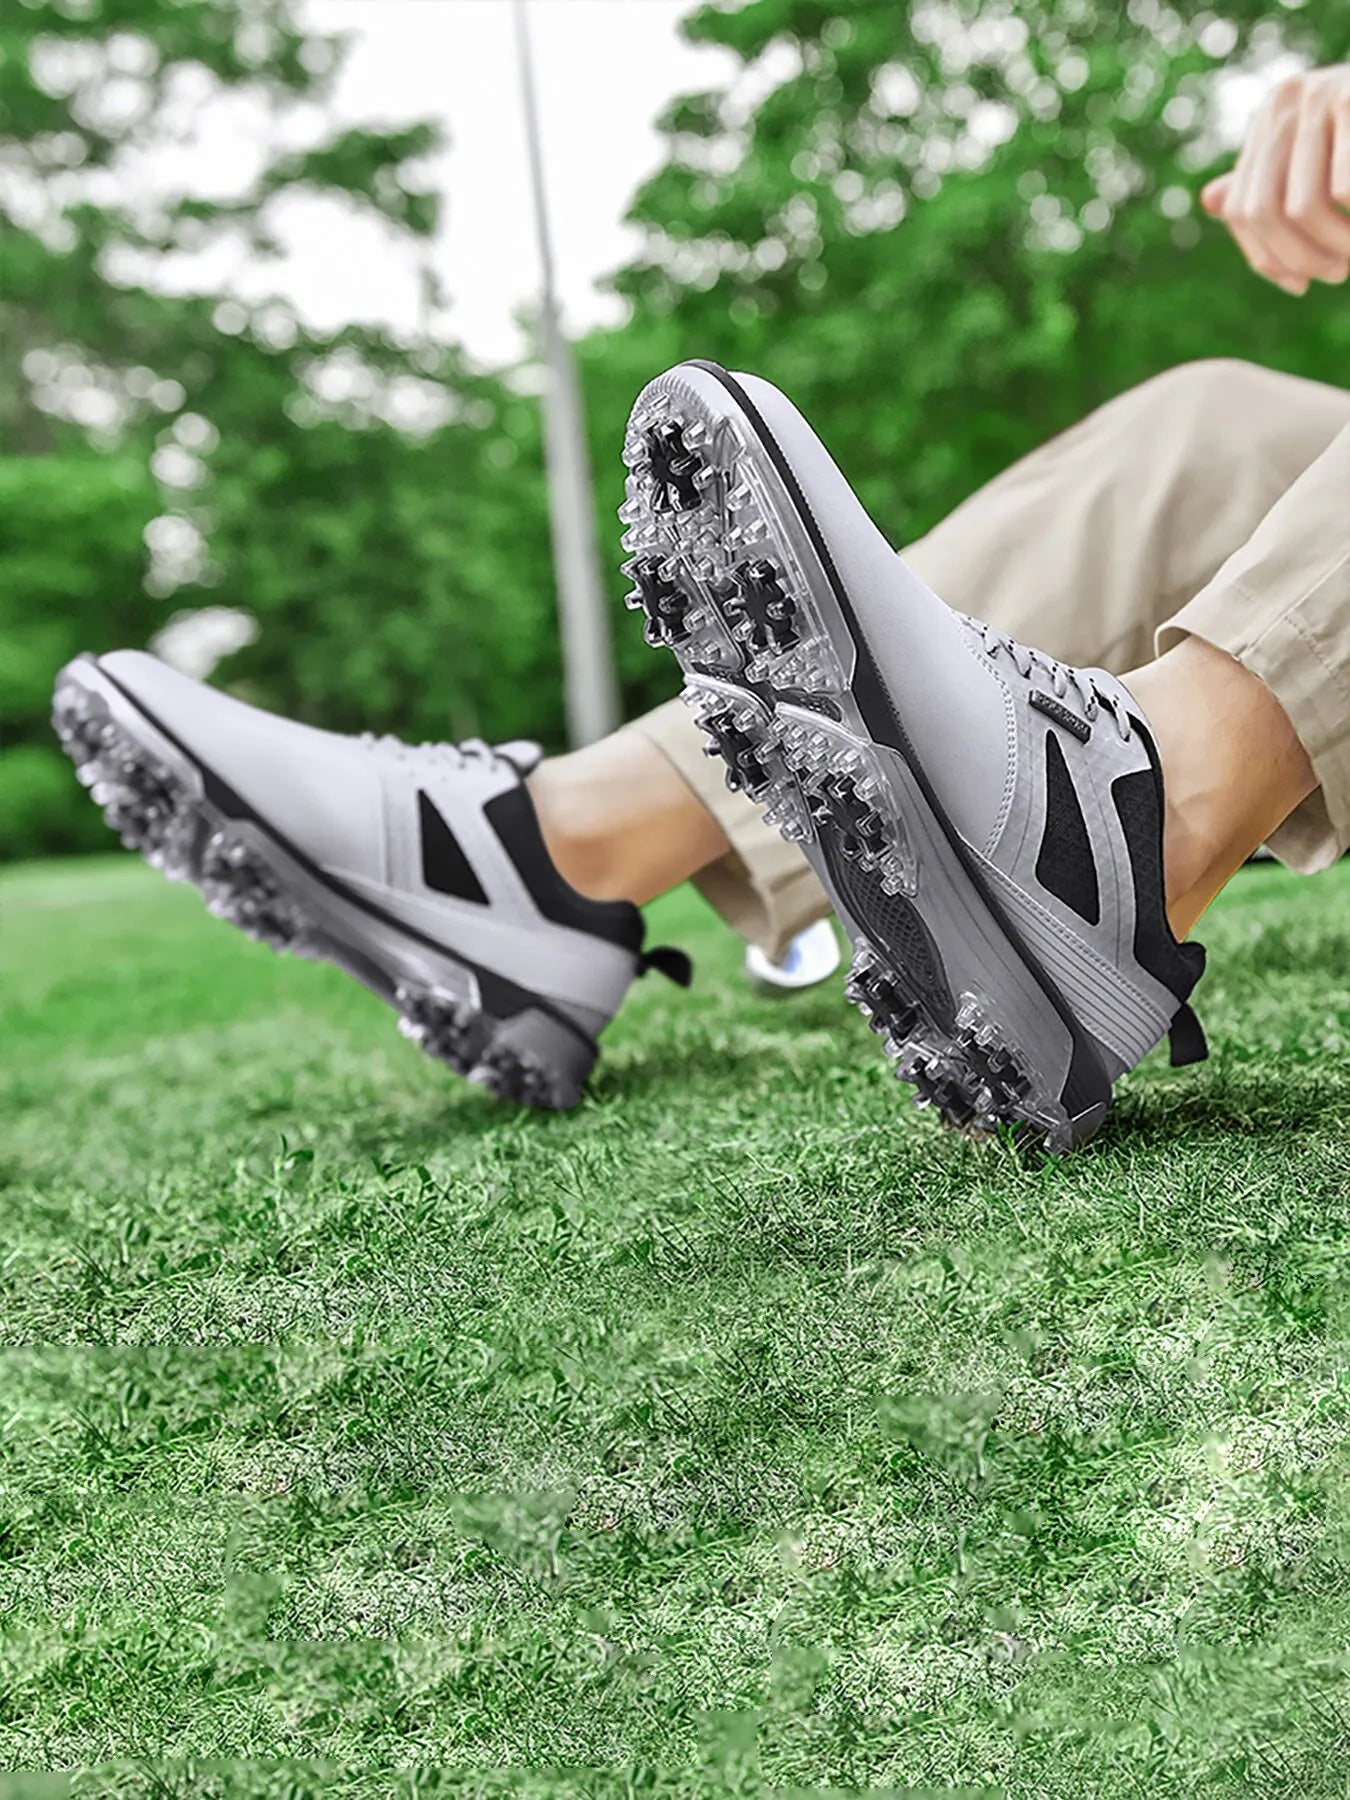 Professional 9-Spike Golf Shoes for Men